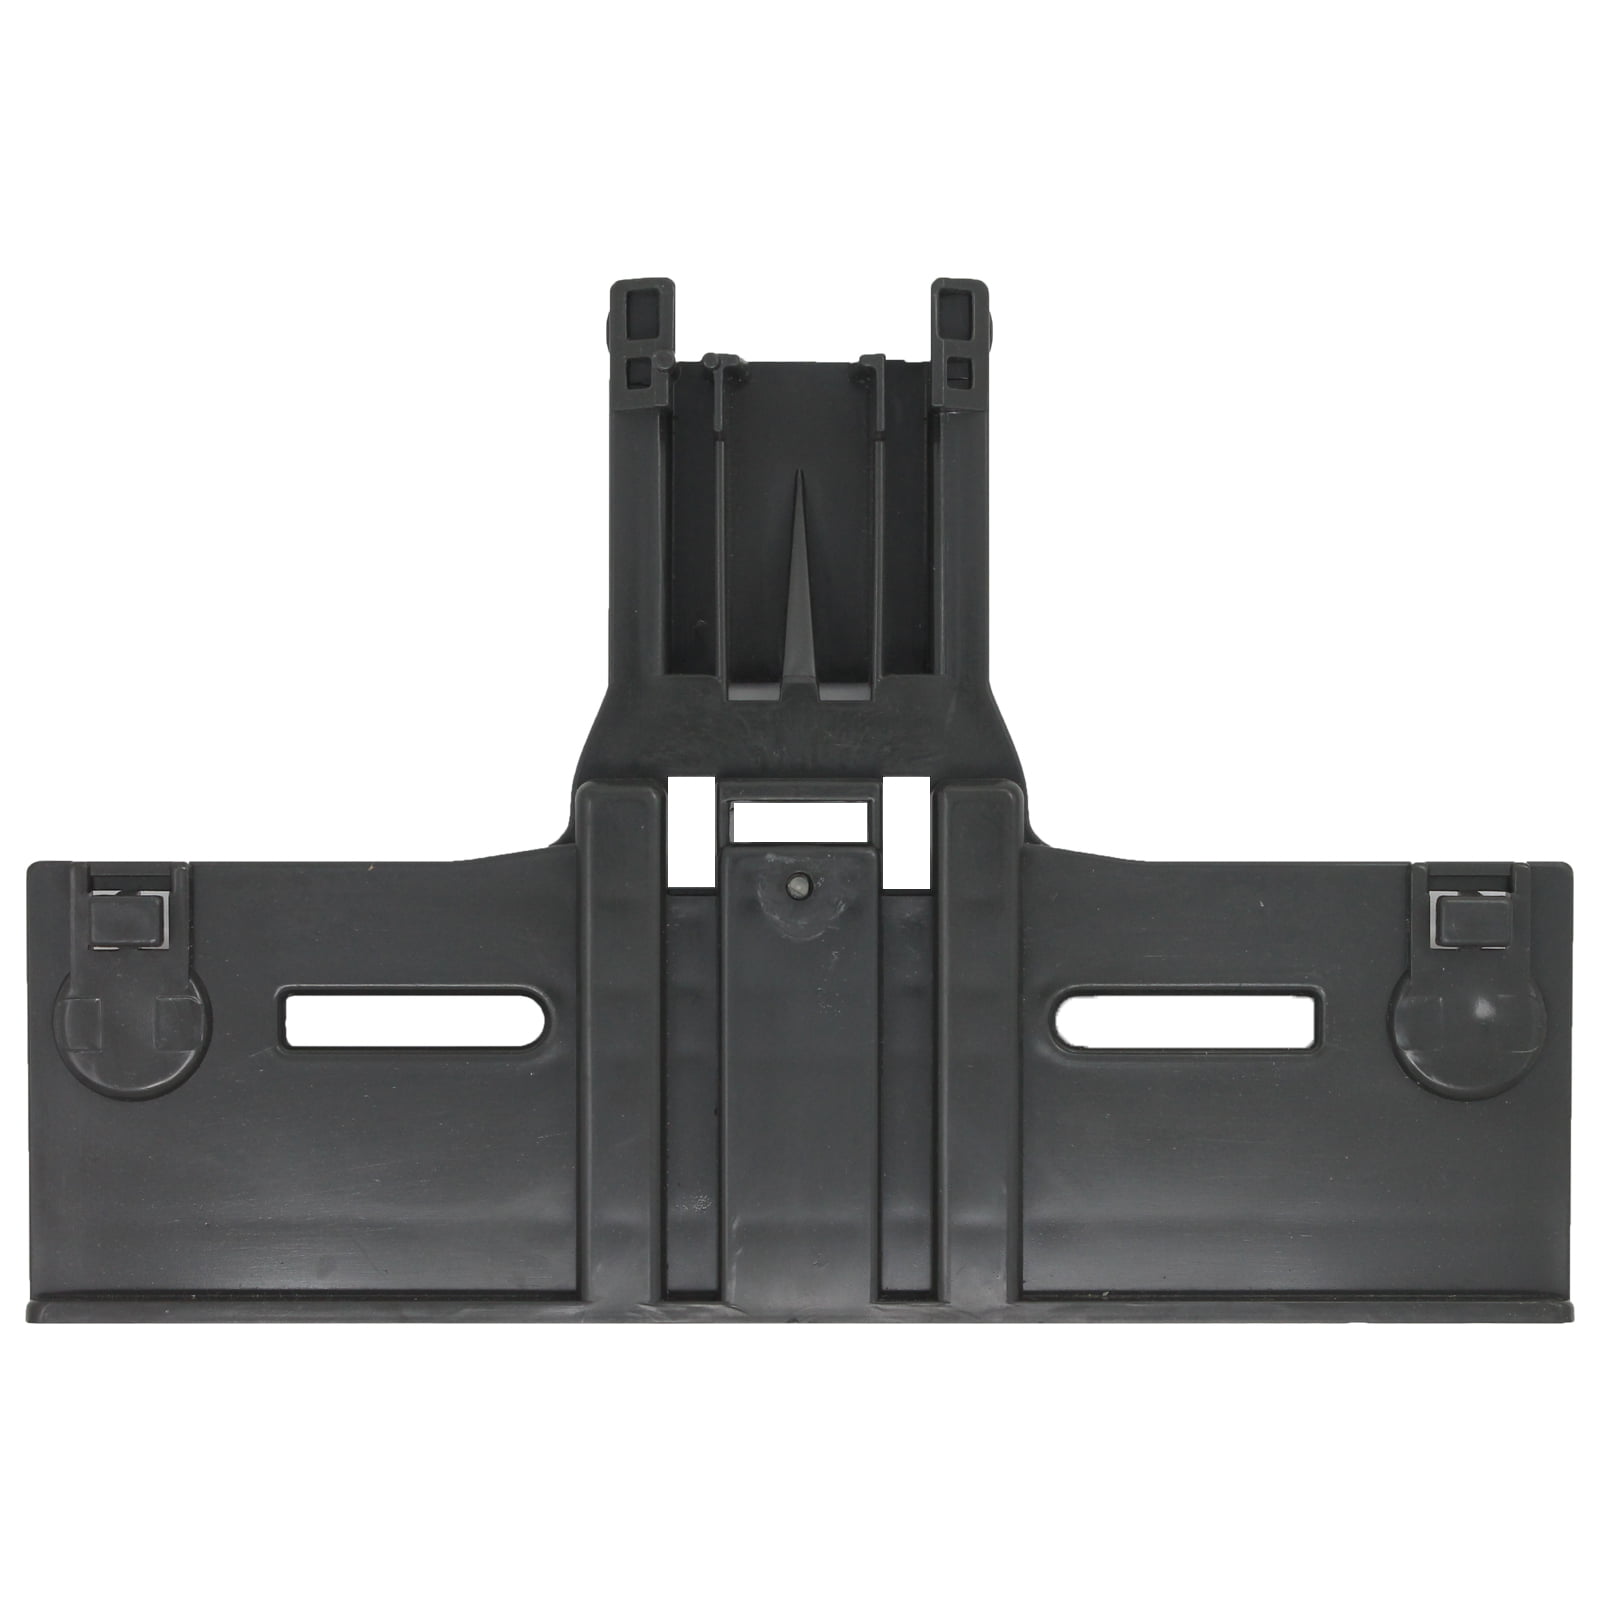 Details about   W10350376 Upper Top Rack Adjuster Compatible with Whirlpool Dishwasher Pack of 2 